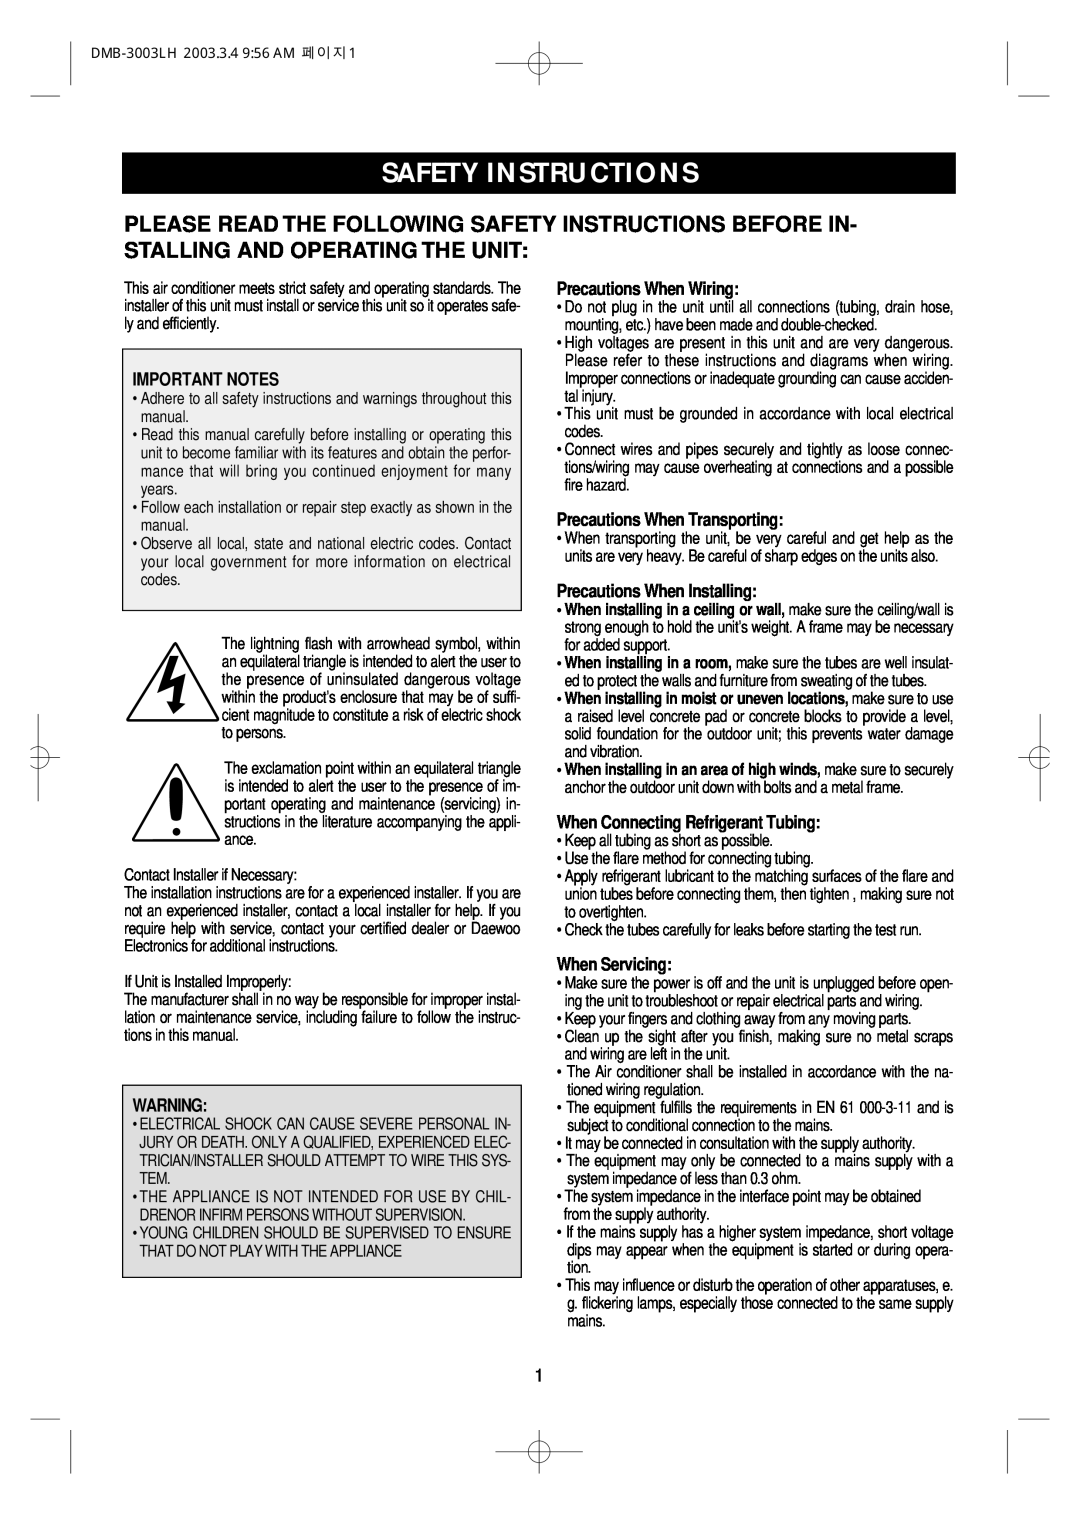 Daewoo DMB-3003LH owner manual Safety Instructions, Important Notes, Precautions When Wiring, Precautions When Transporting 